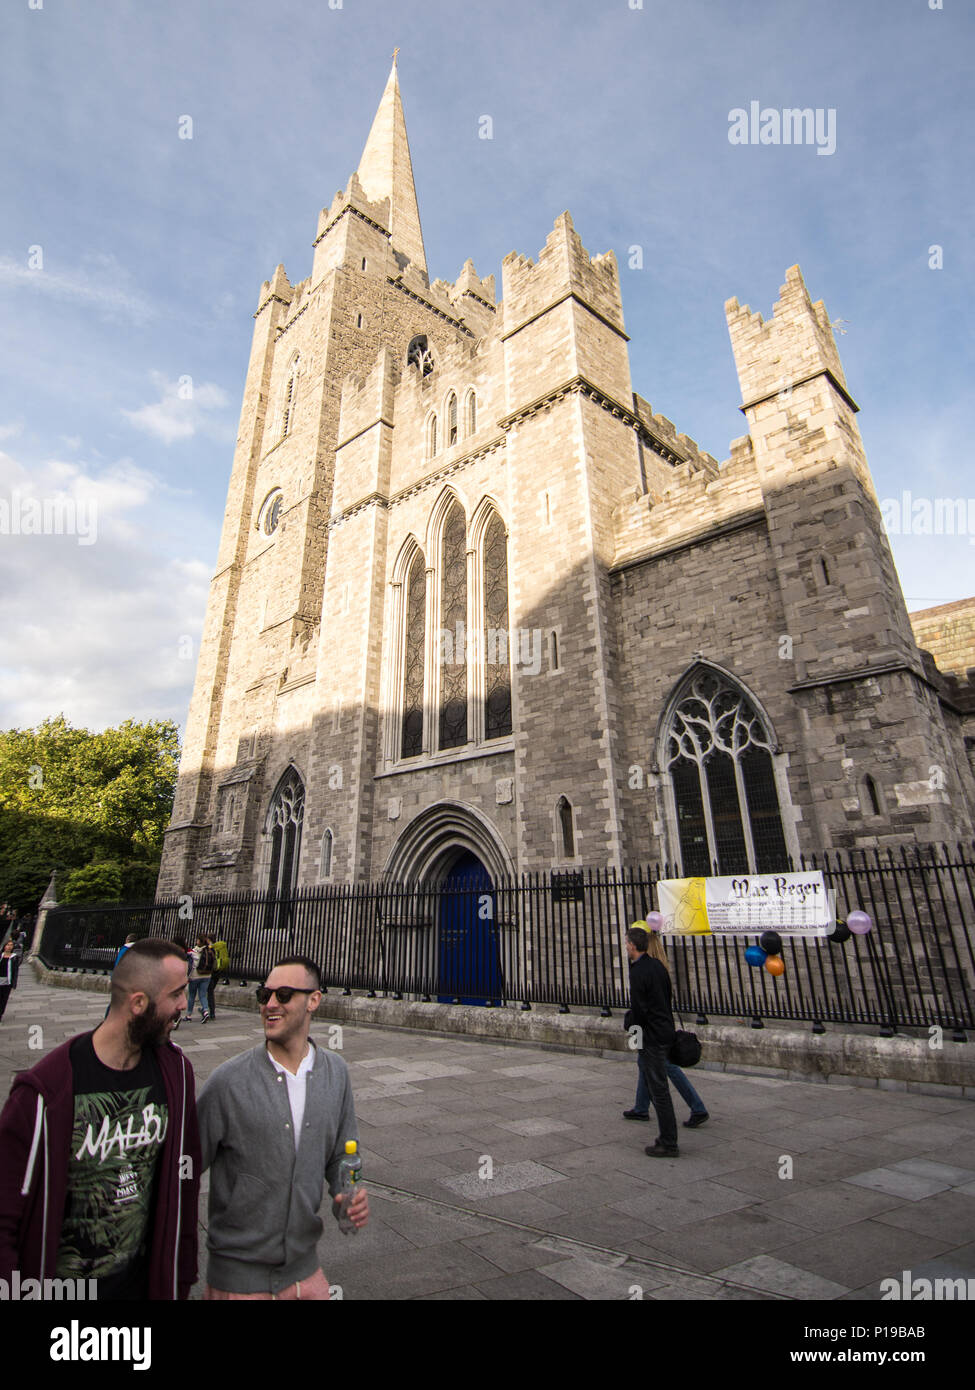 Dublin, Ireland - September 16, 2016: Pedestrians and tourists pass the west front and tower of St Patrick's Roman Catholic cathedral in Dublin. Stock Photo